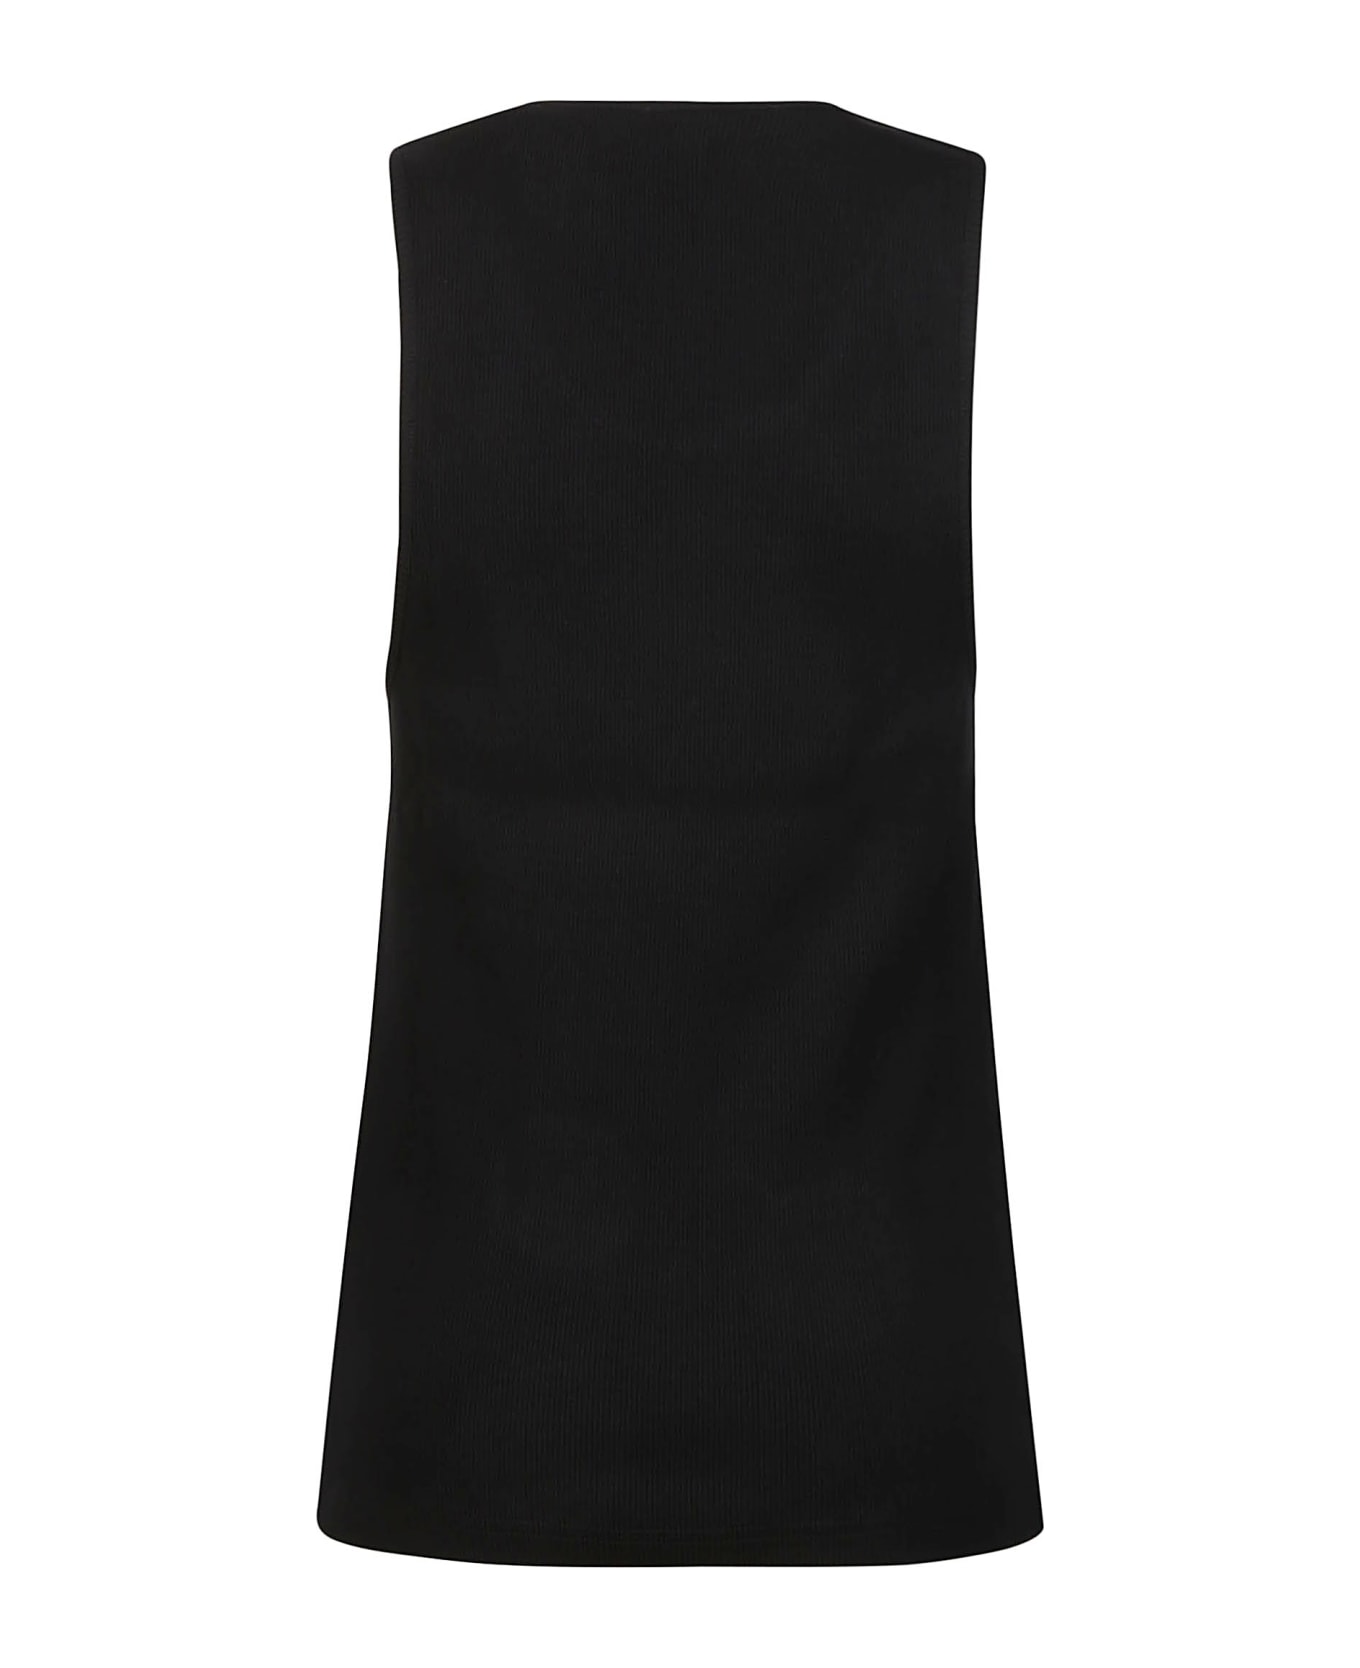 J.W. Anderson Anchor Embroidery Tank Top - Black